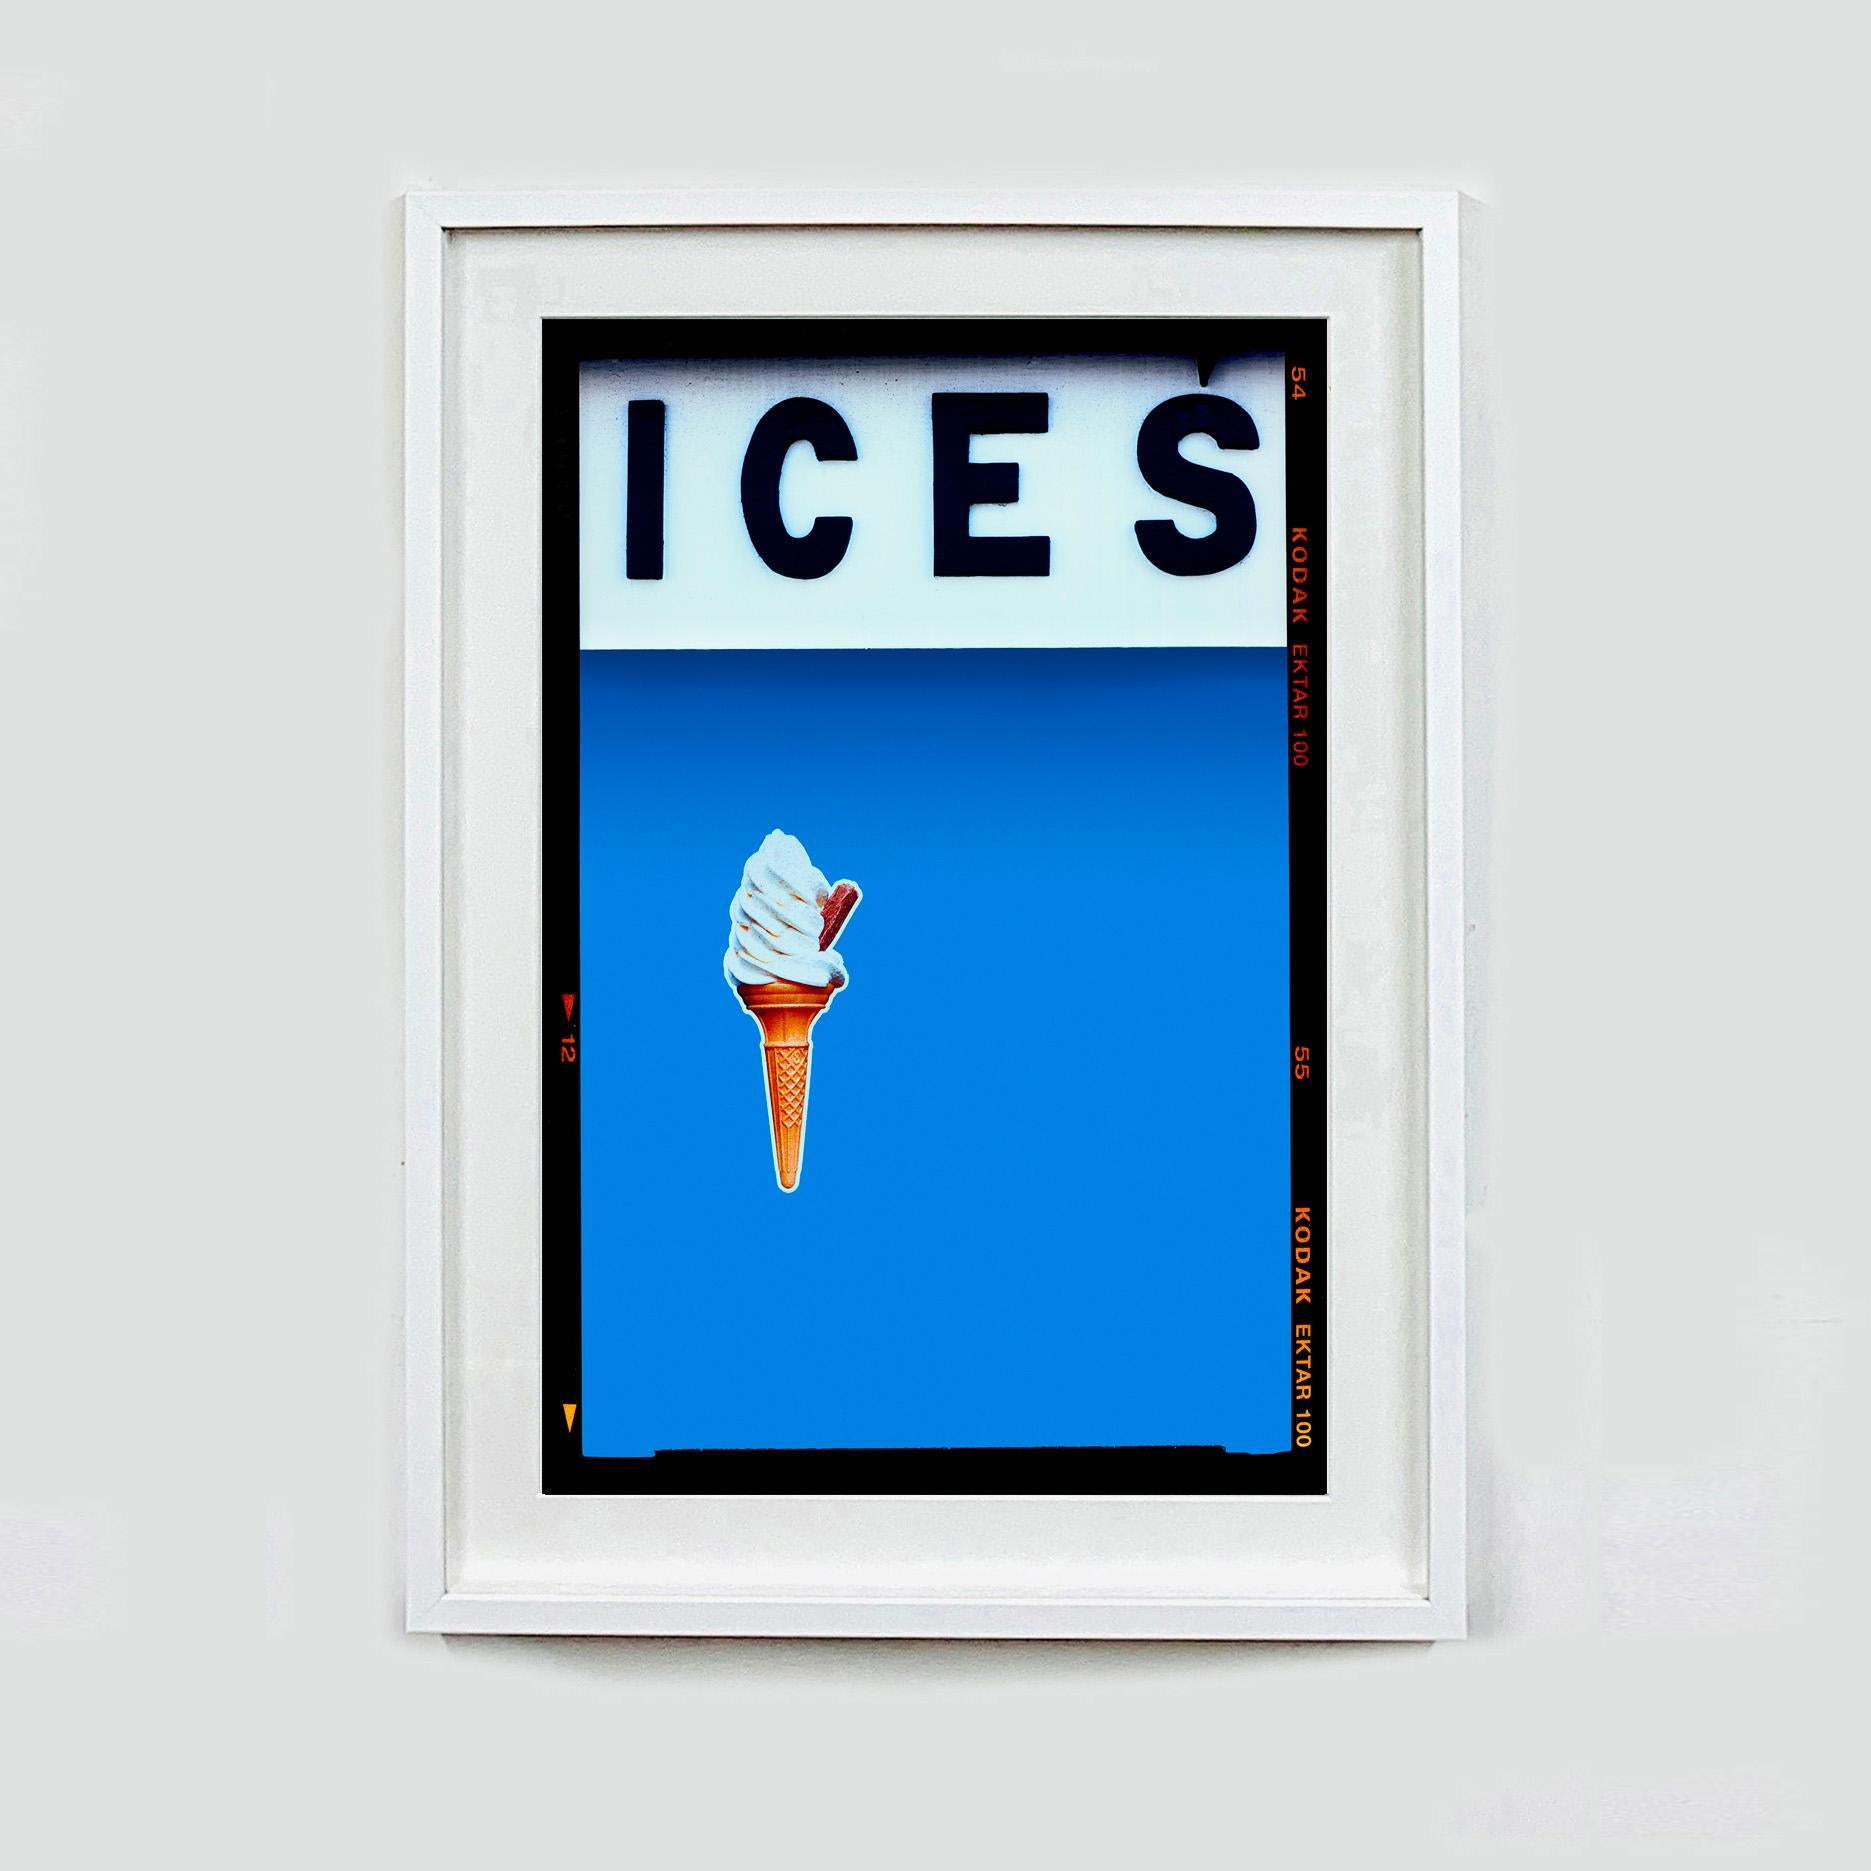 Ices (Sky Blue), Bexhill-on-Sea - British seaside color photography - Contemporary Photograph by Richard Heeps